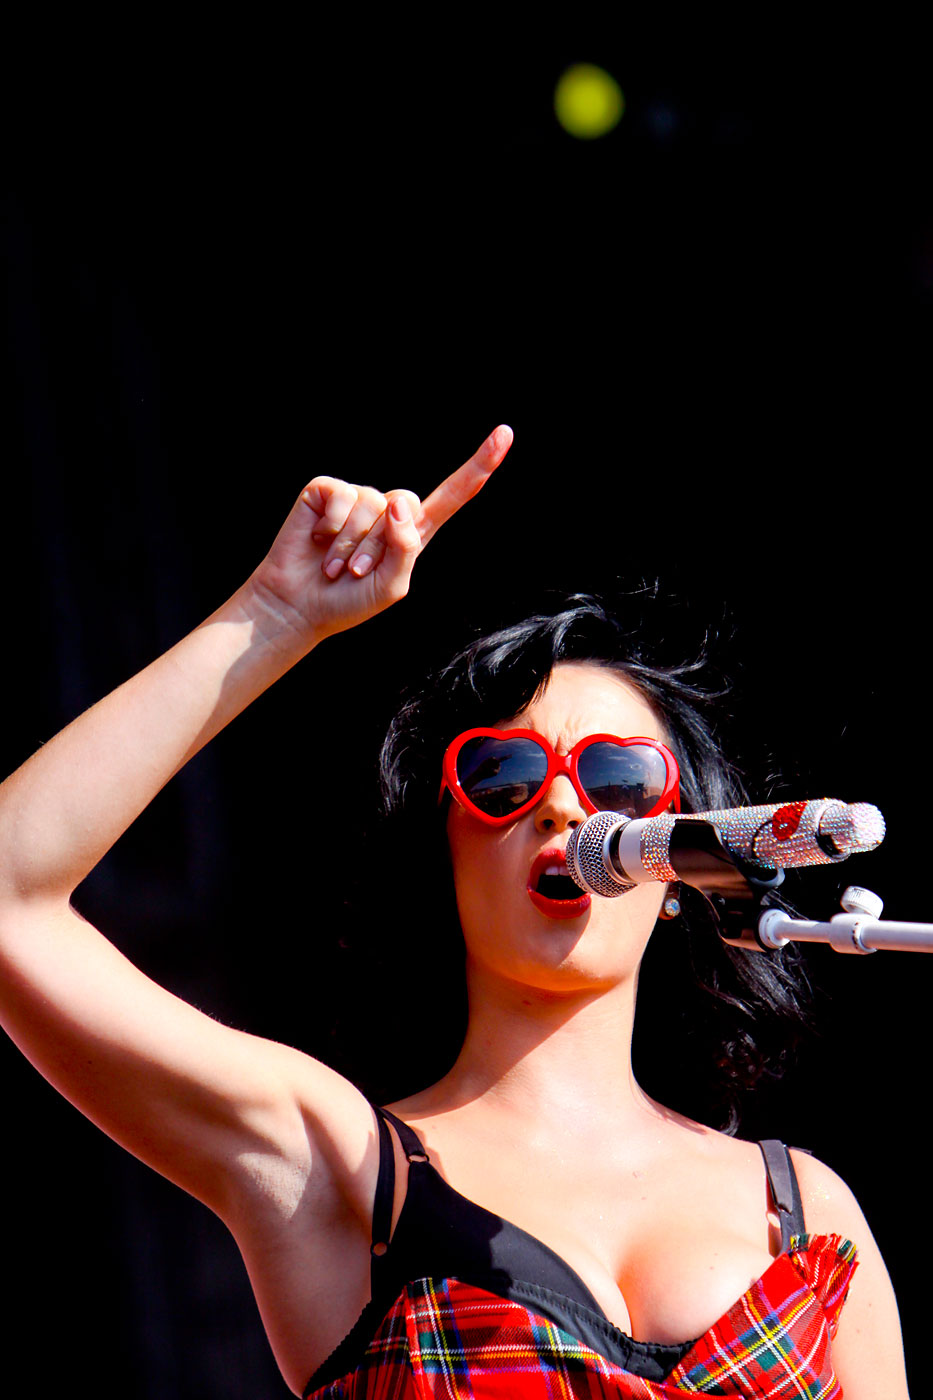 Scotland - Music - Katy Perry - Live Concert "T in the Park" Festival